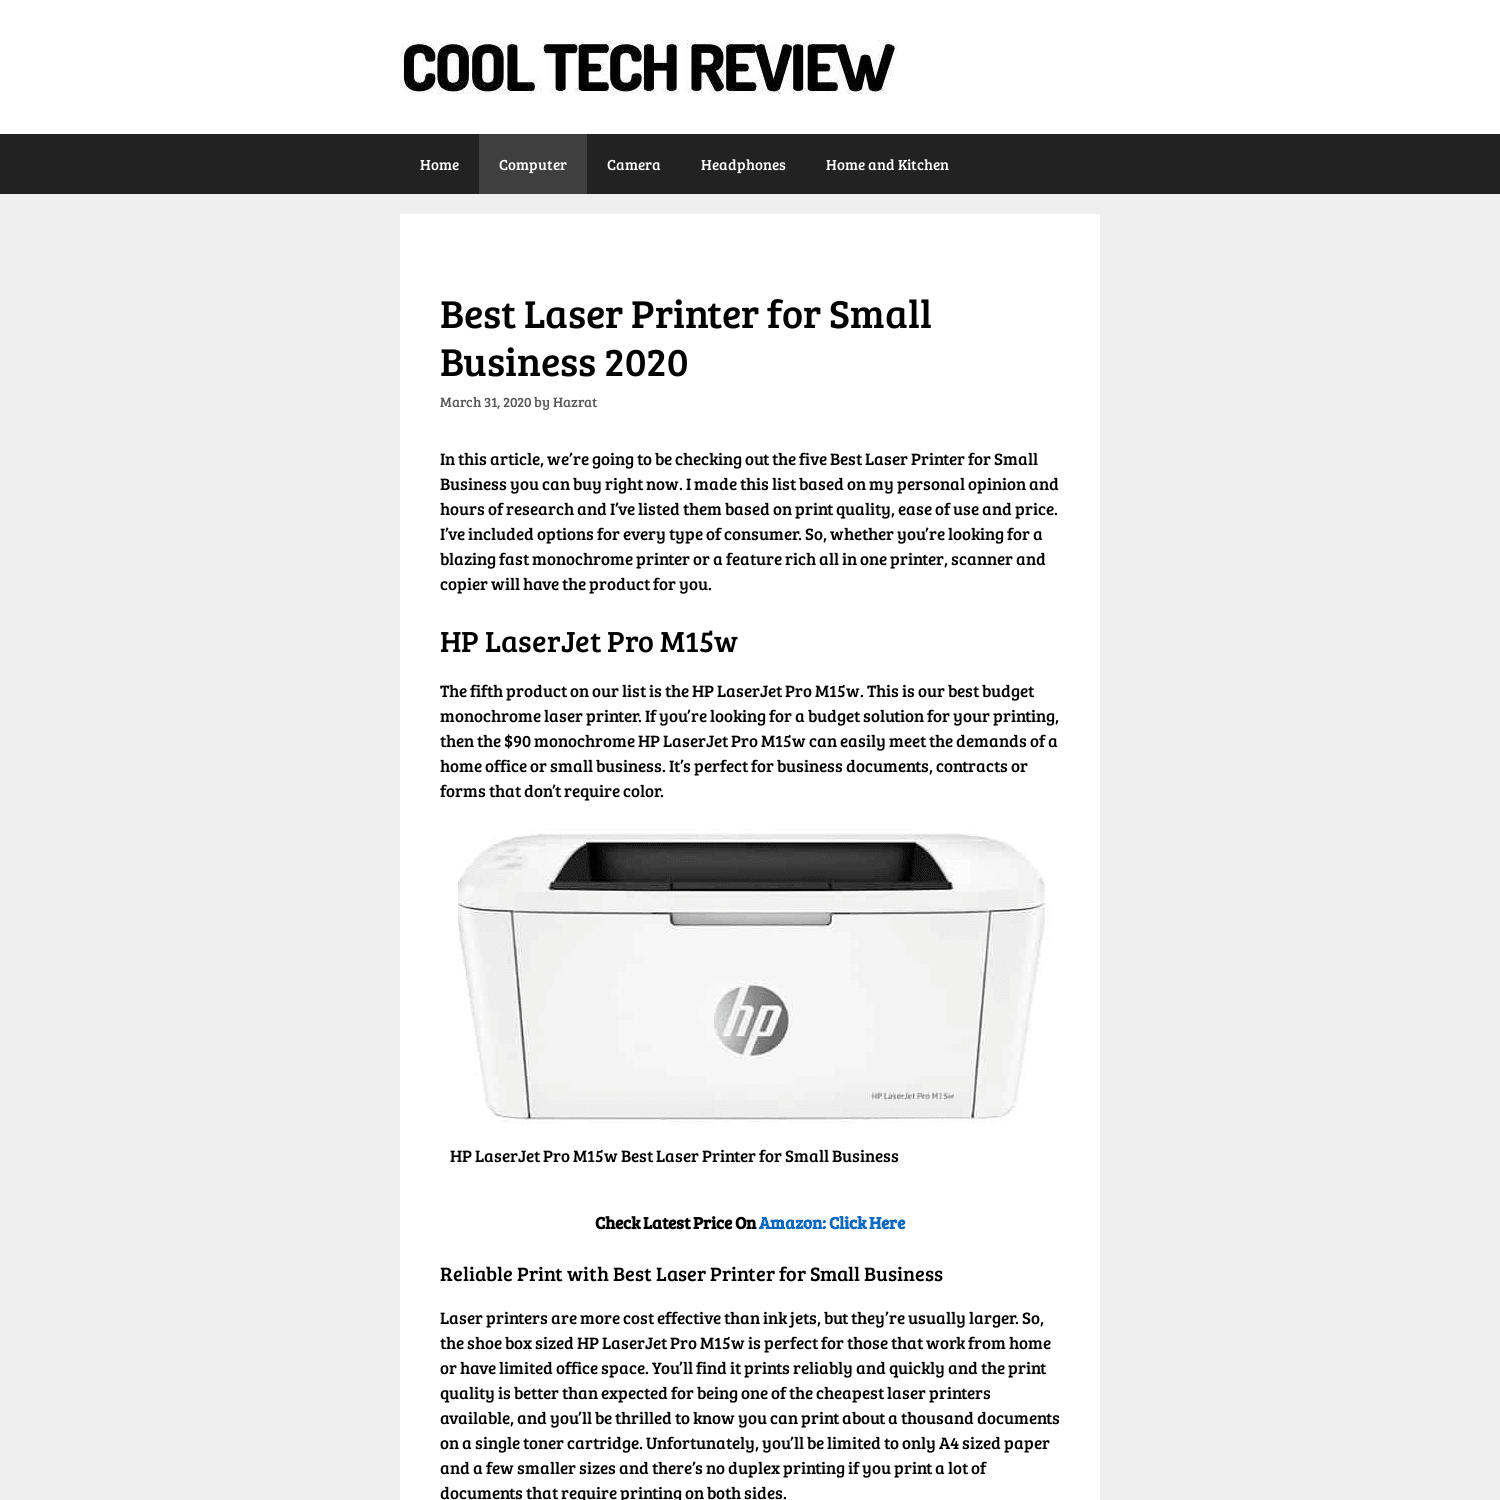 https://cooltechreview.com/best-laser-printer-for-small-business-2020/?_thumbnail_id=605&preview=true&preview_id=602&preview_nonce=bfceda5049